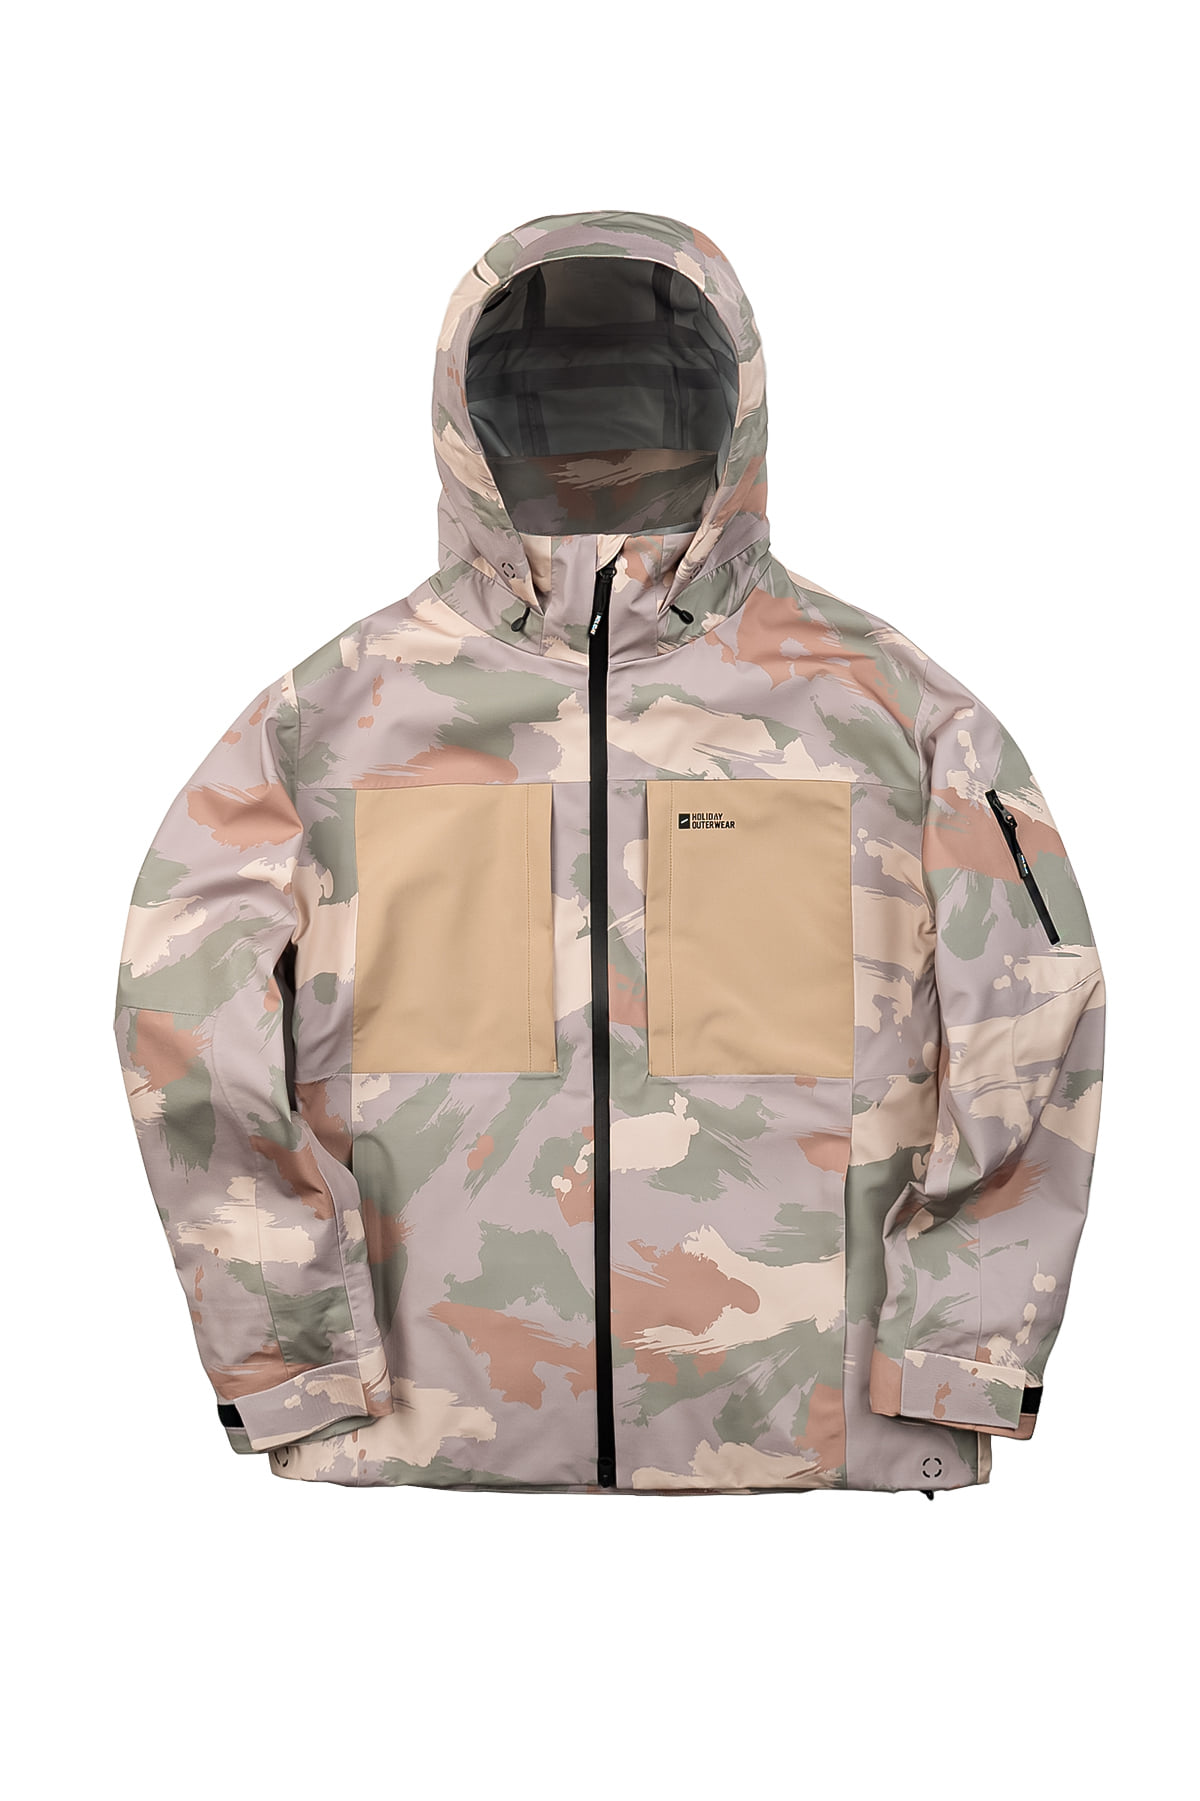 SUMMIT 3L JACKET[3layer]-DUST CAMOHOLIDAY OUTERWEAR